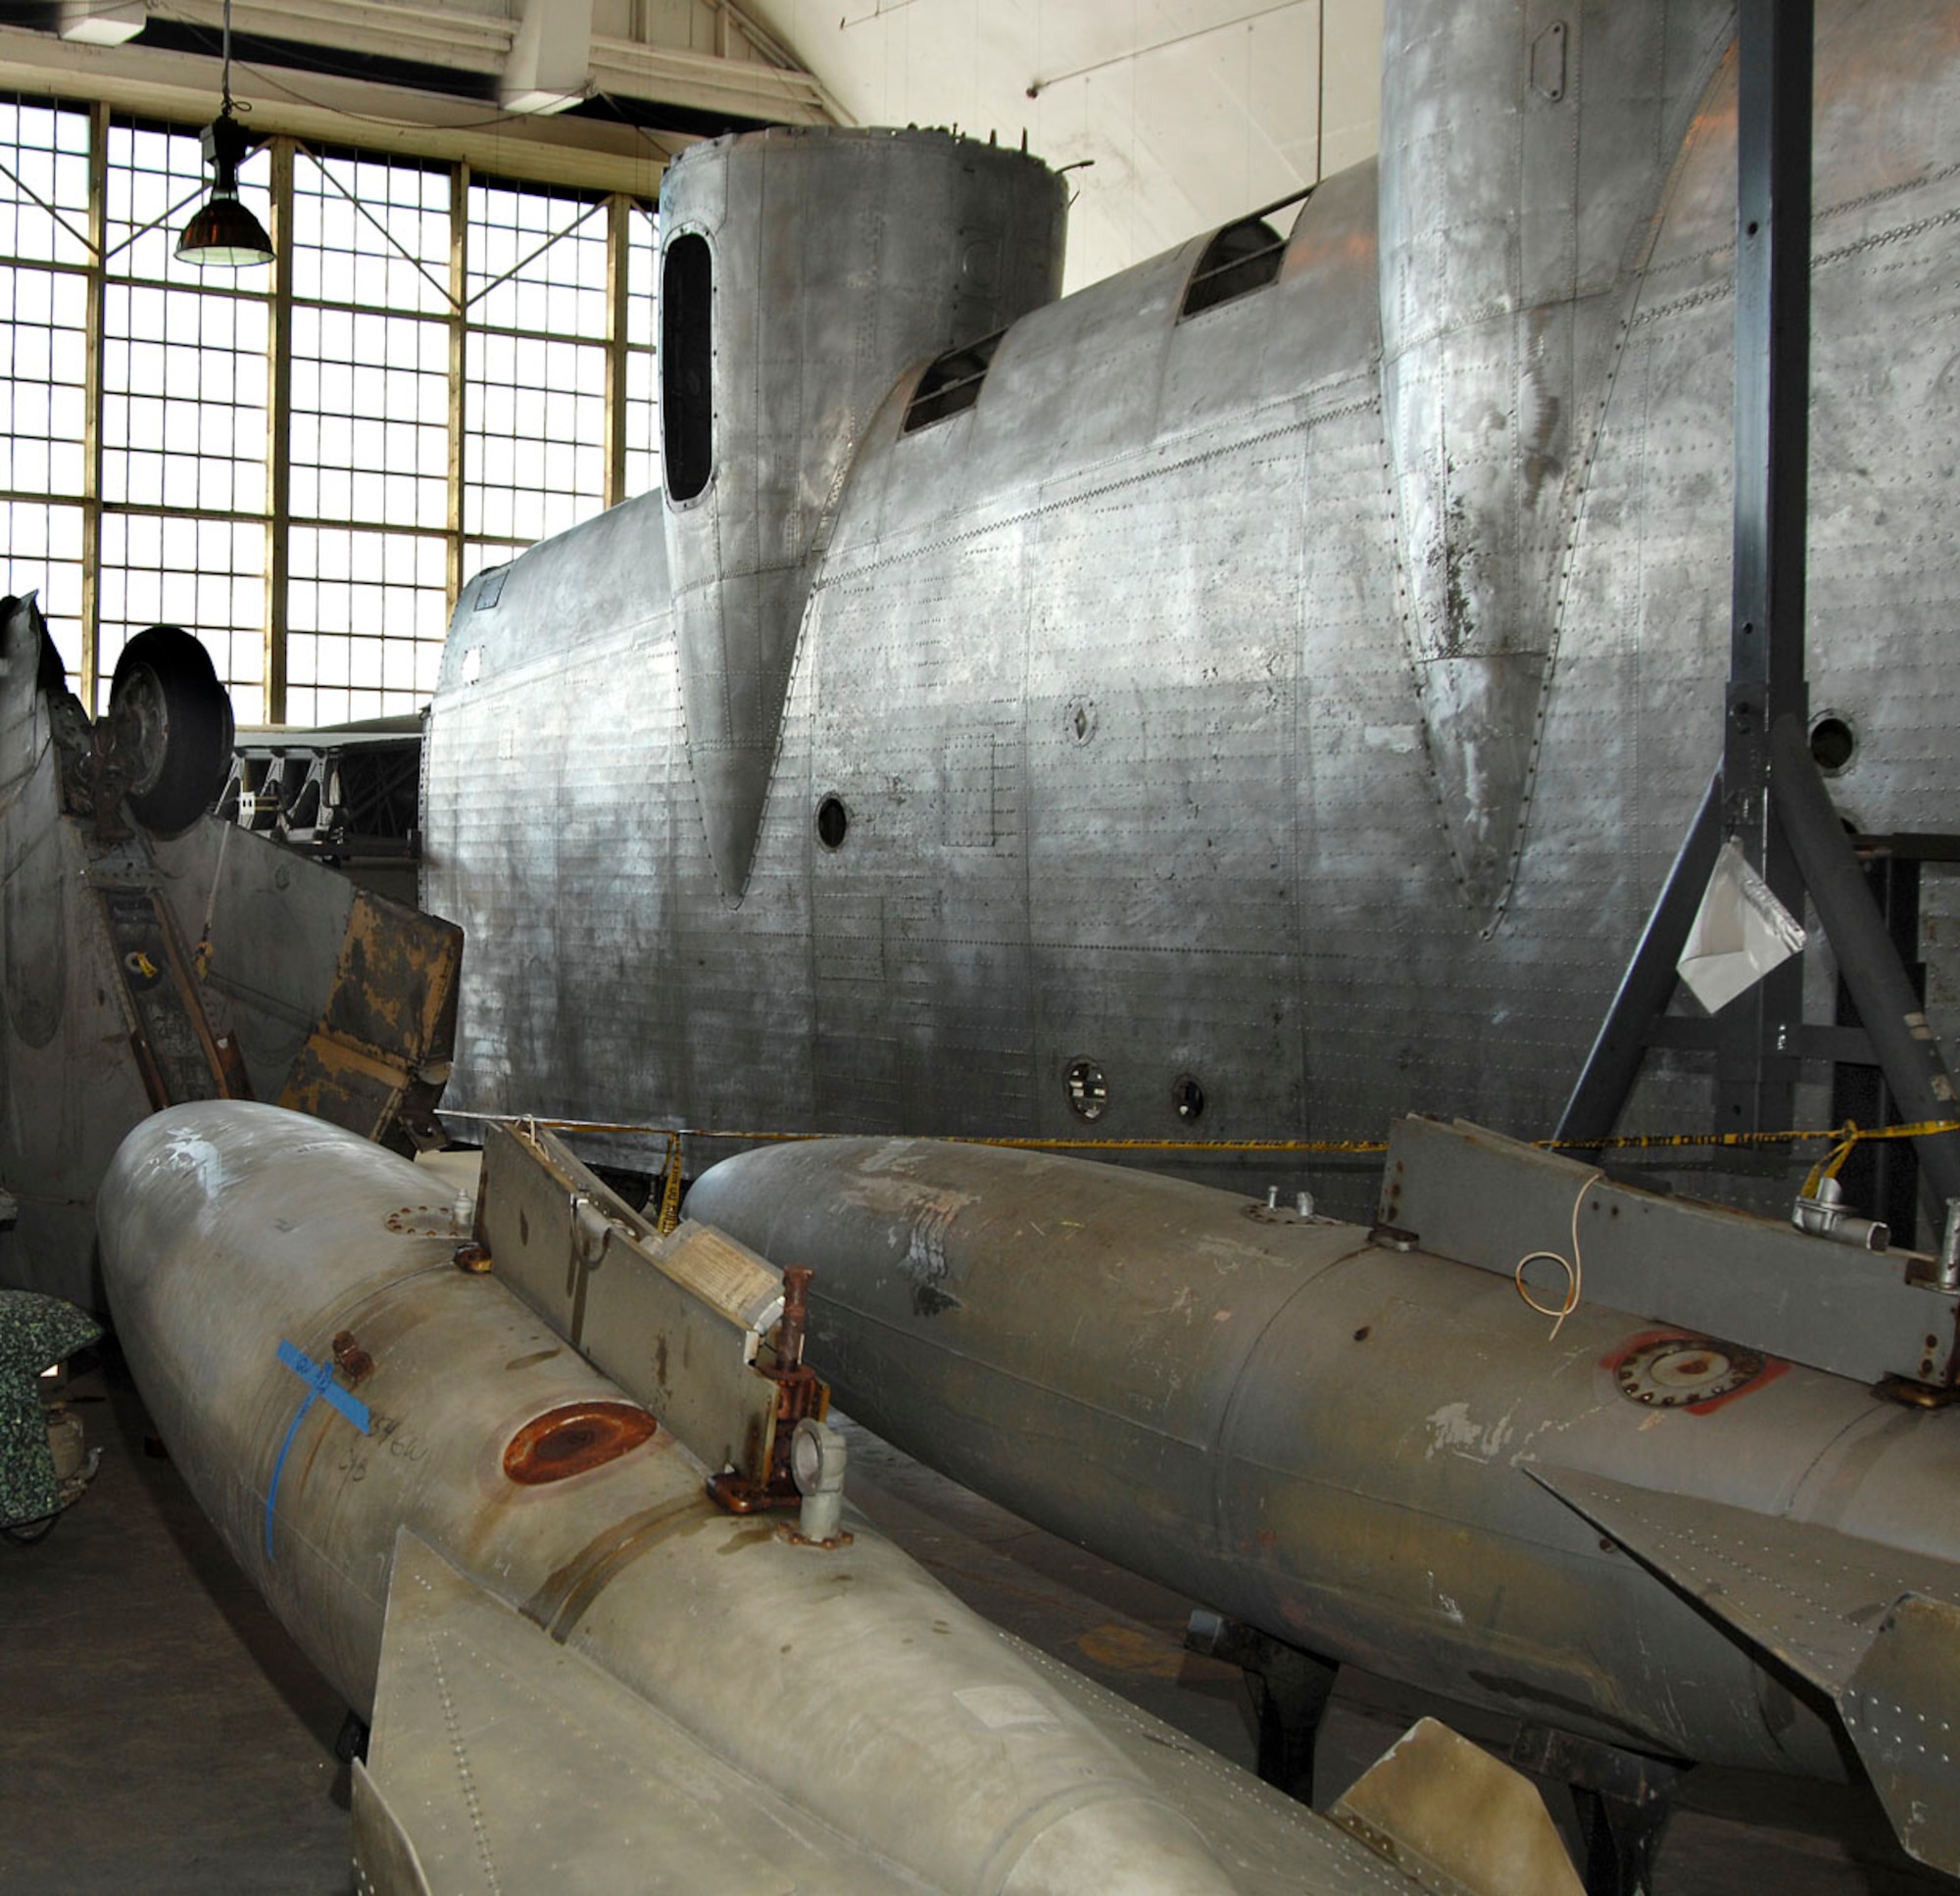 DAYTON, Ohio (02/2007) - Part of the a wing from the "Memphis Belle" in the restoration area of the National Museum of the U.S. Air Force. (U.S. Air Force photo by Ben Strasser)